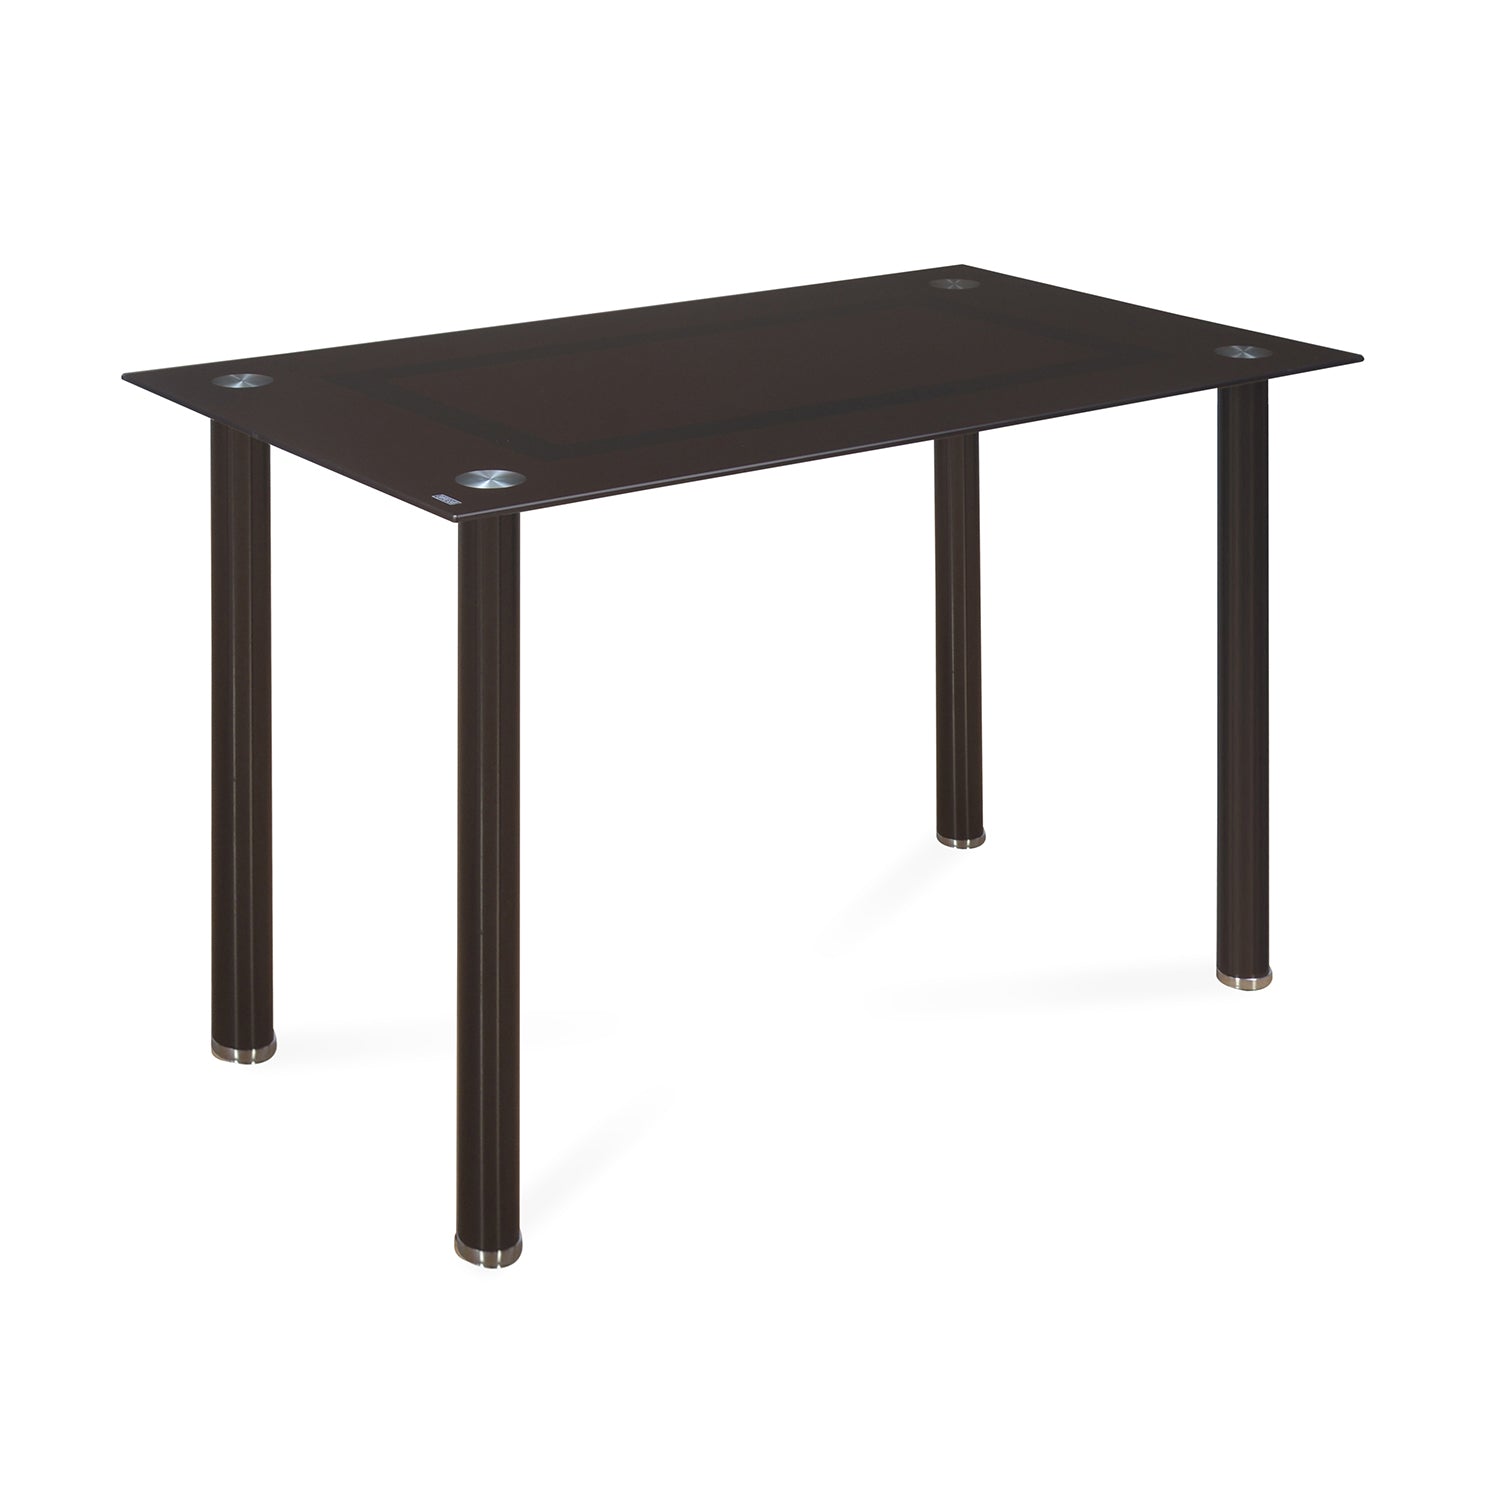 Joseph 4 Seater Dining Table (Brown)